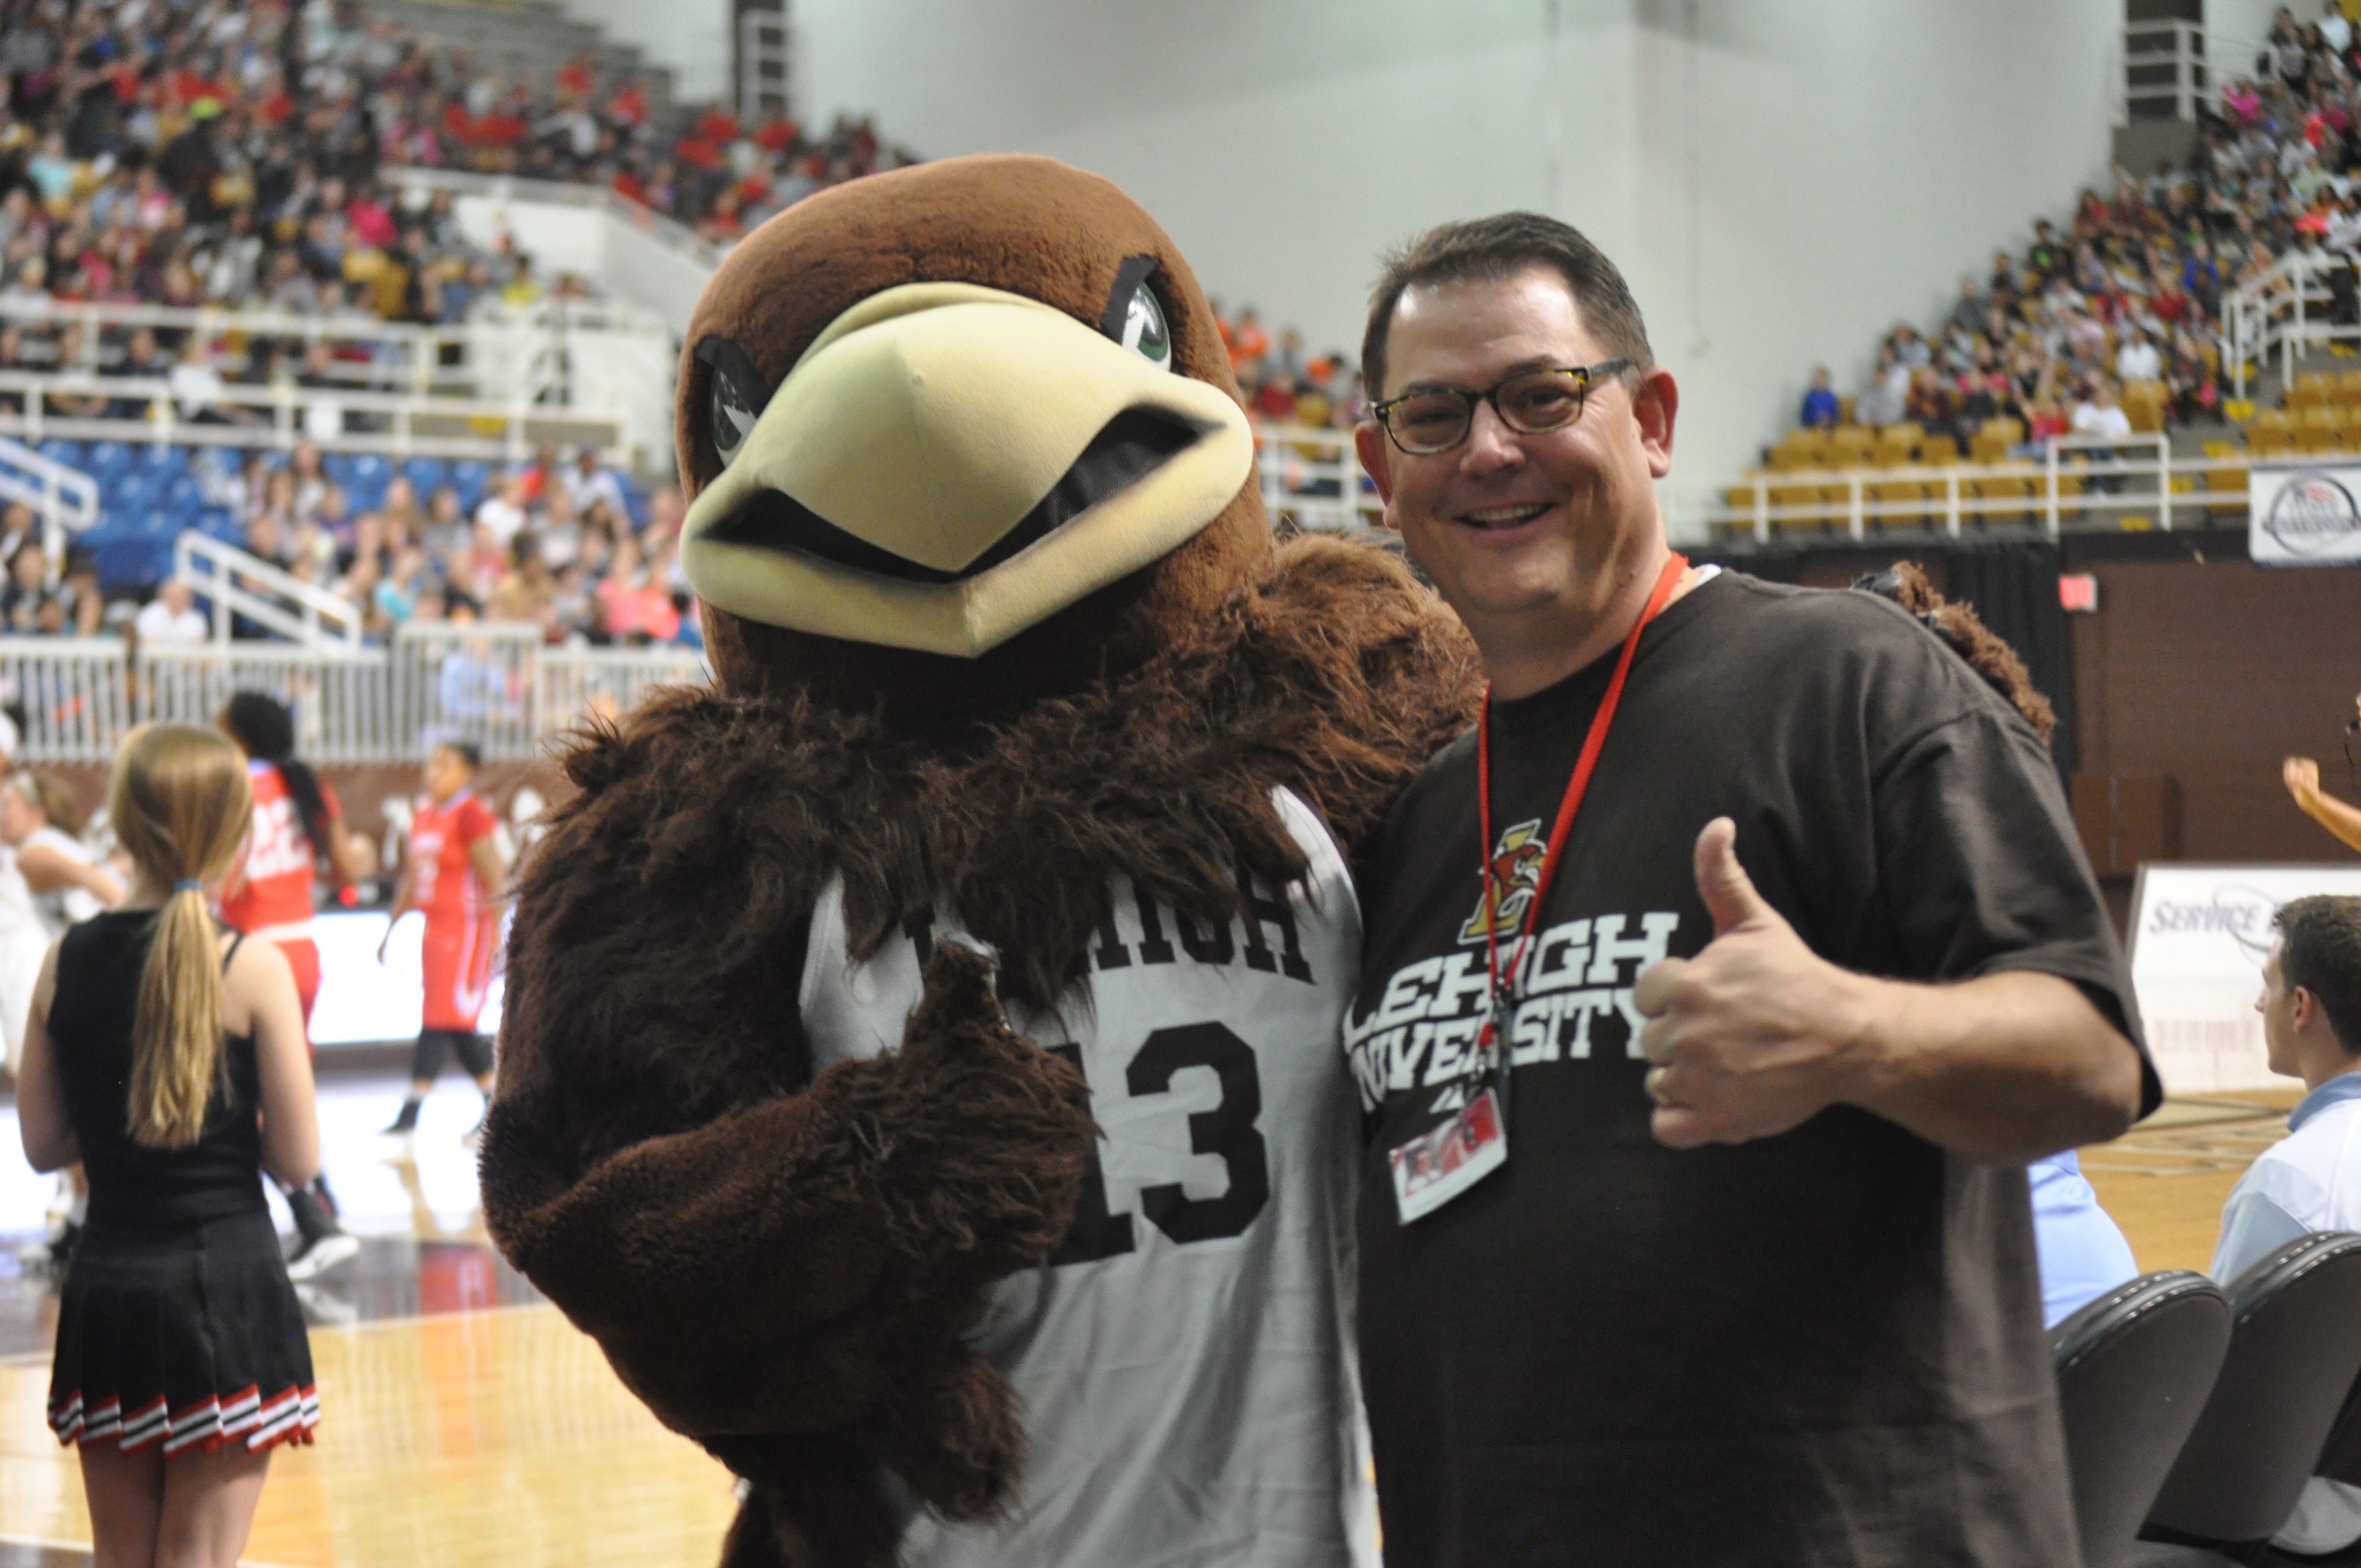 SVMS Assistant Principal Halcisak spending some quality time with Lehigh's mountain hawk.